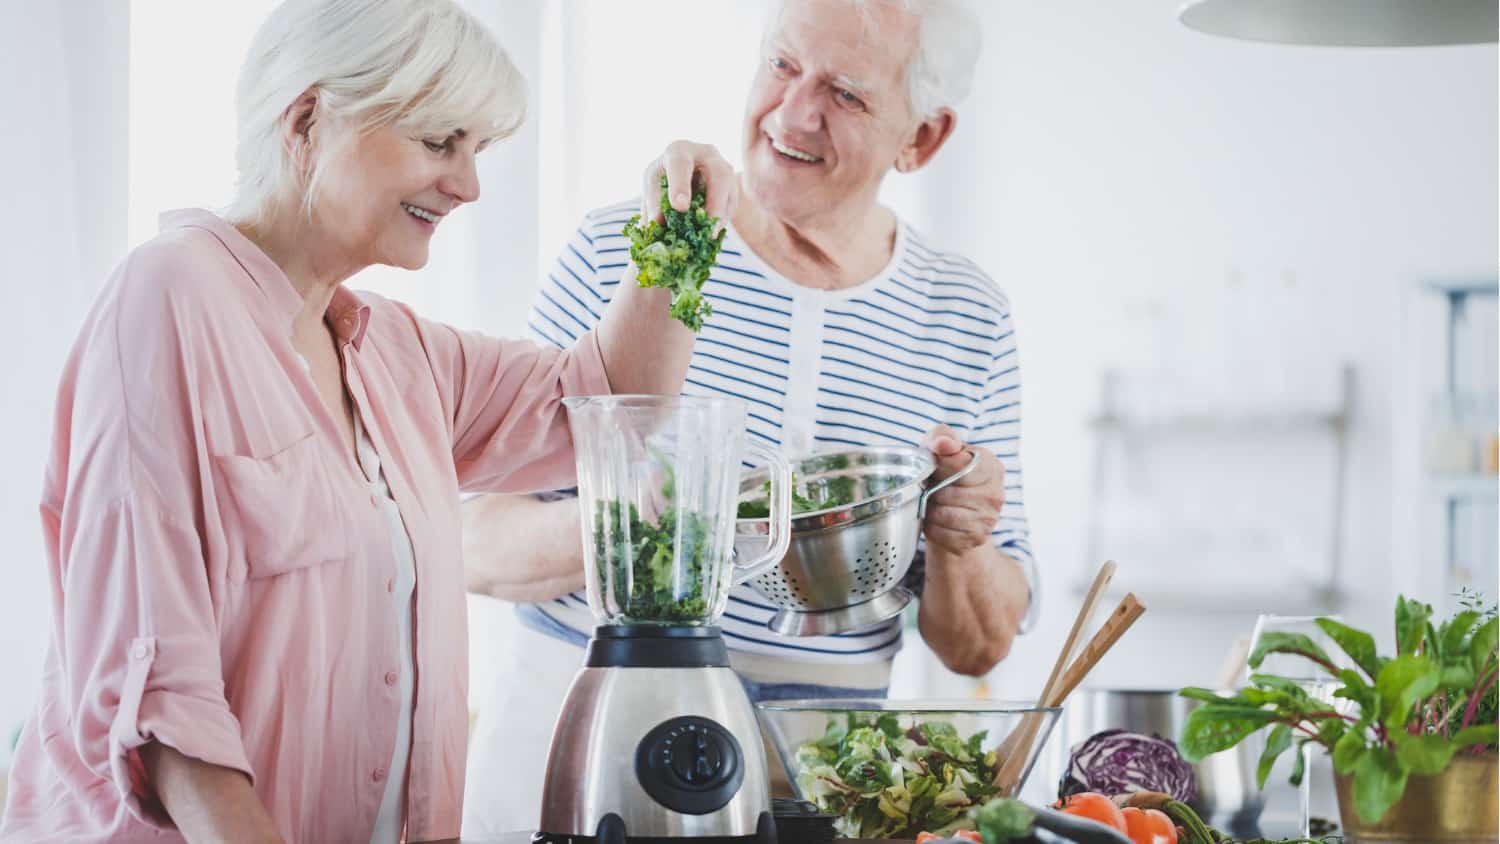 https://cdn.sixtyandme.com/wp-content/uploads/2021/02/Sixty-and-Me_5-Kitchen-Tools-That-Are-Fun-to-Use-and-Make-Meal-Preparation-Simpler-.jpg